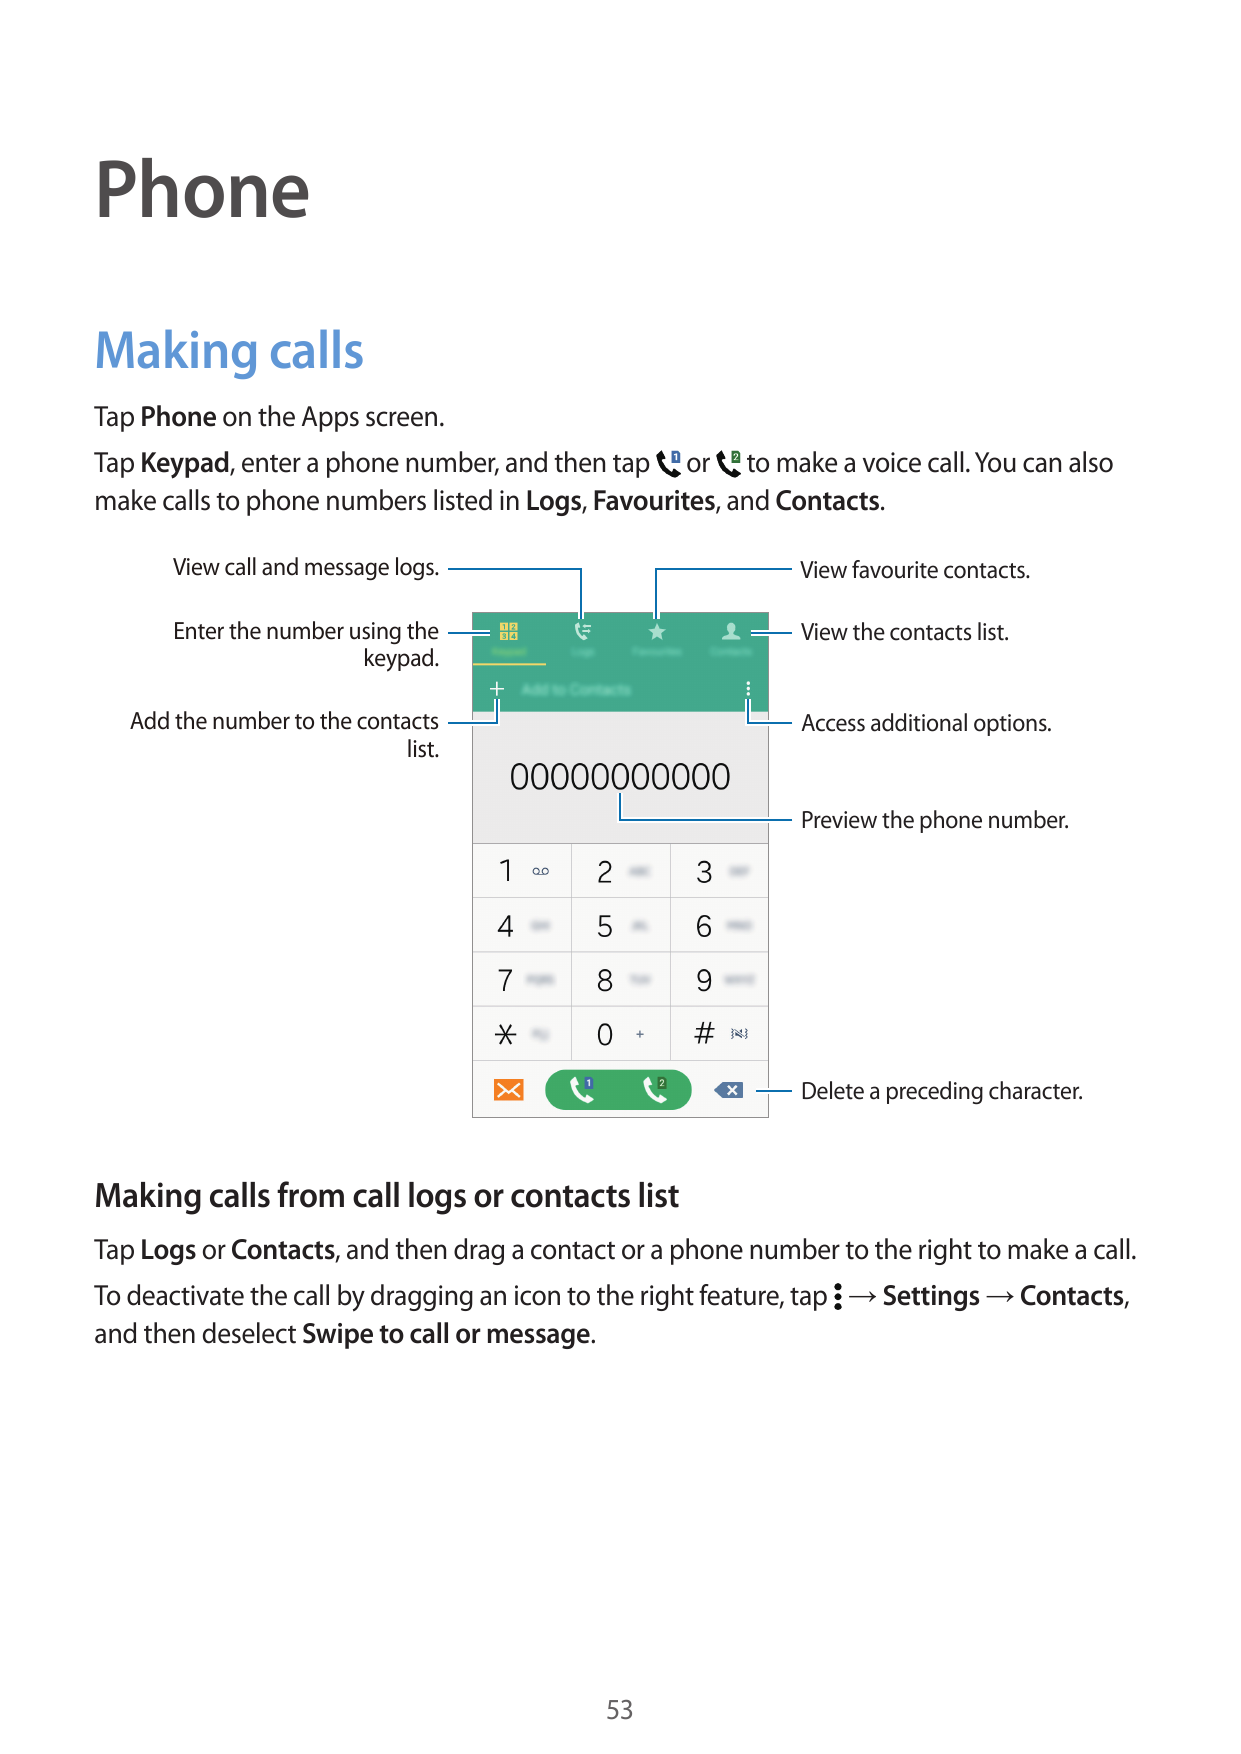 PhoneMaking callsTap Phone on the Apps screen.Tap Keypad, enter a phone number, and then tap or to make a voice call. You can al